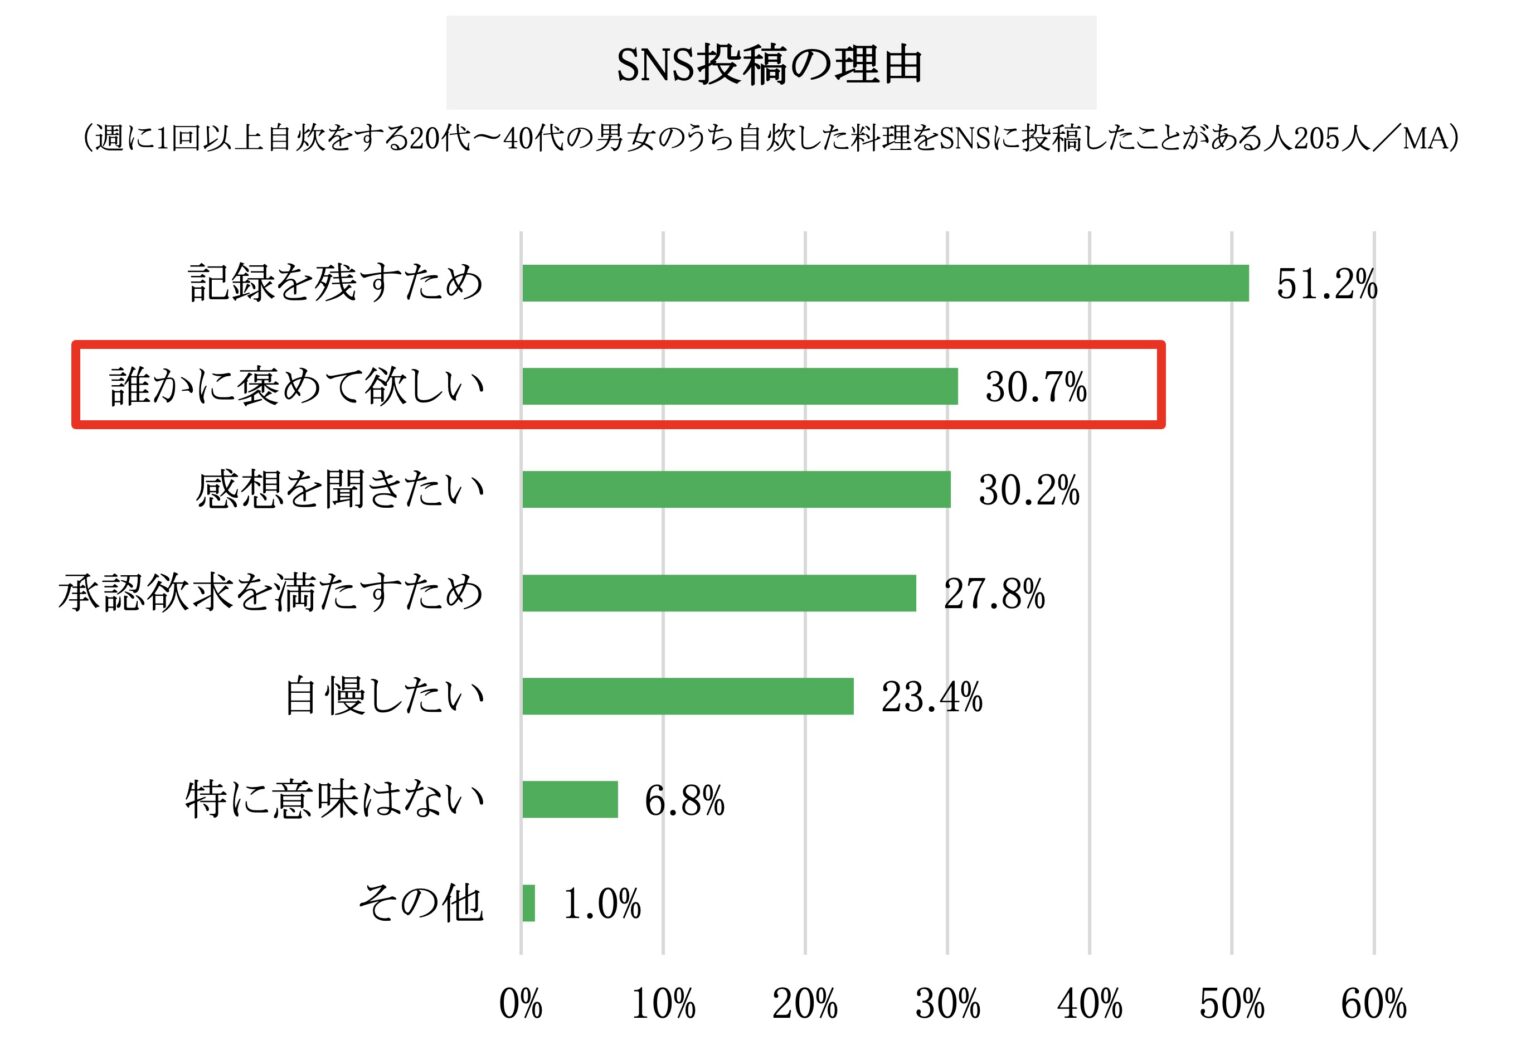 SNS投稿の理由